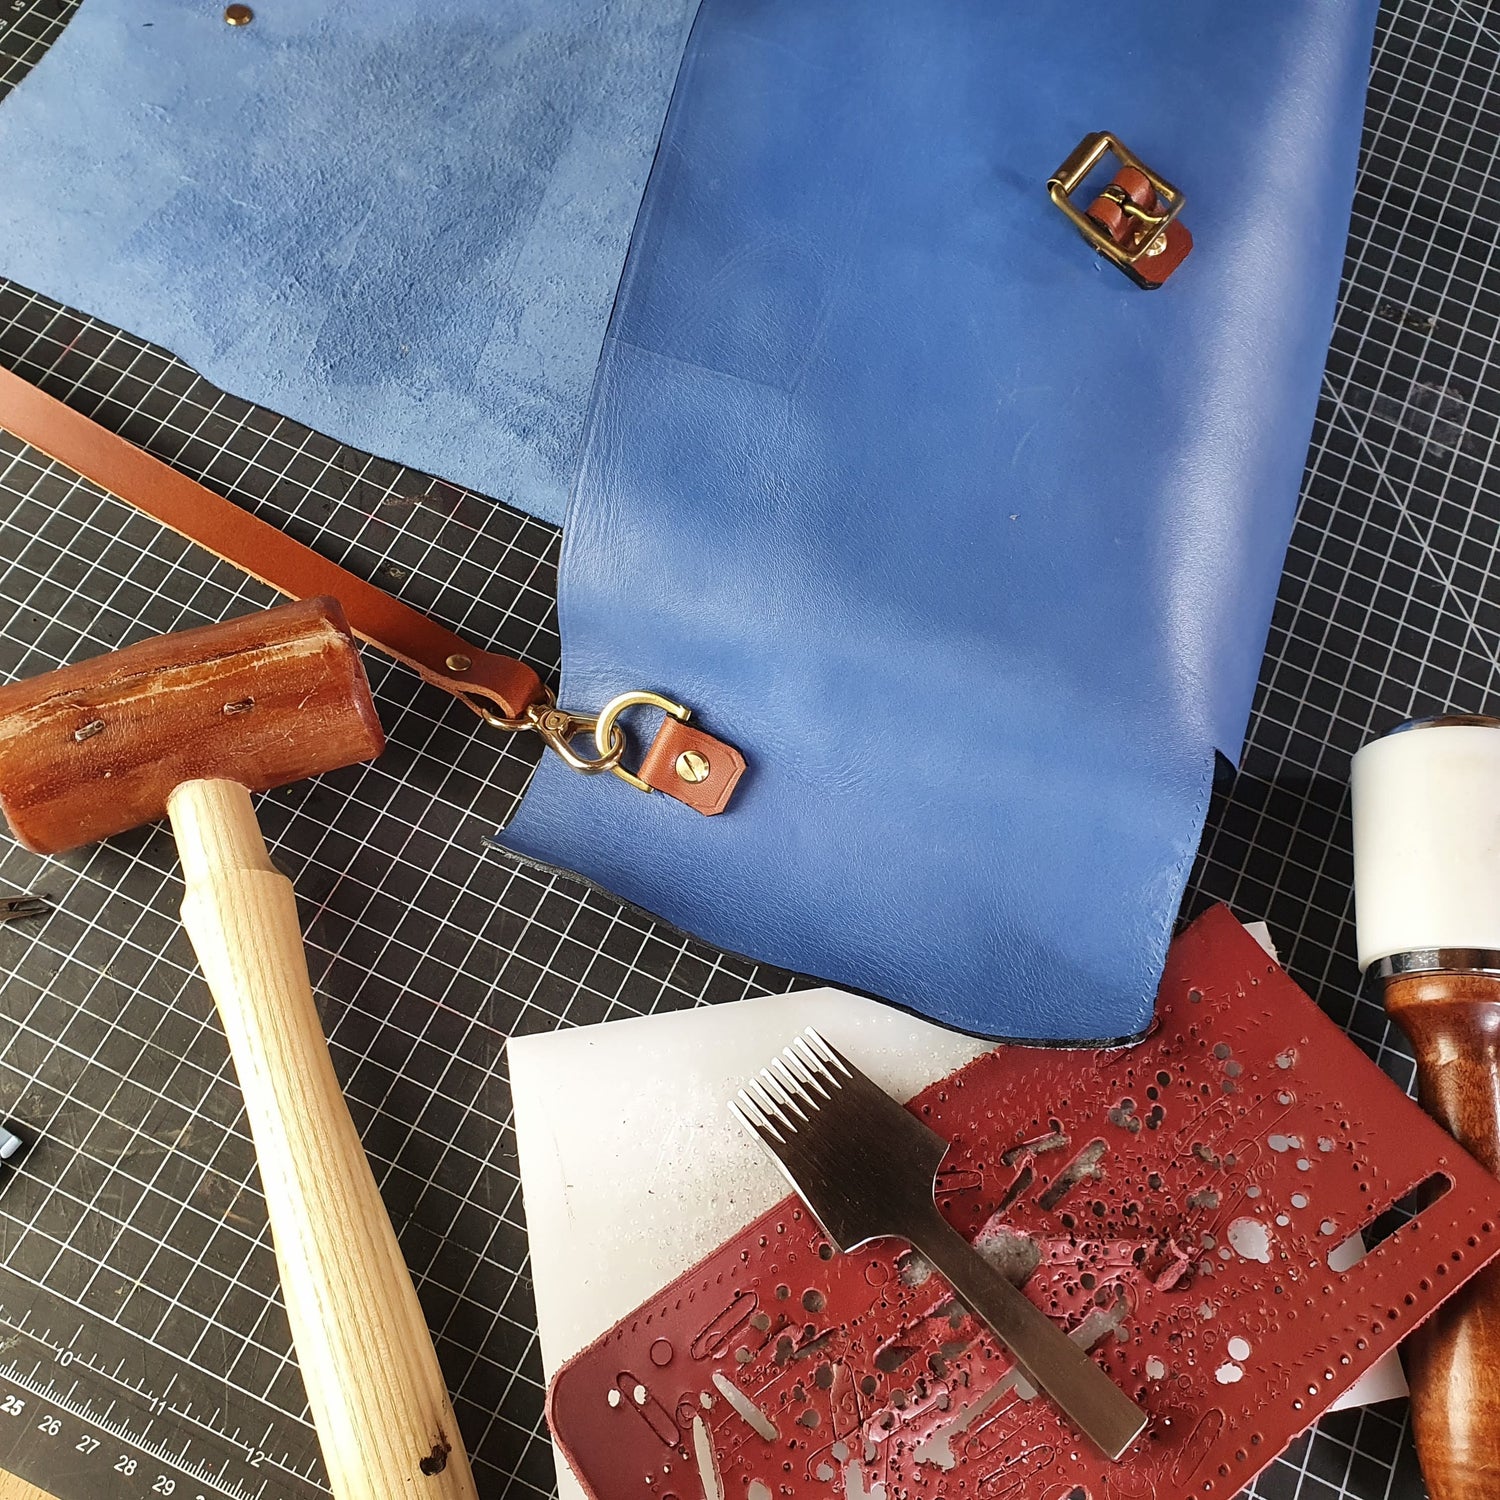 Hands of Tym Course Saturday 6th August 2022 'Bag in a Day' Practical Hand Stitching Leather Course - The Satchel